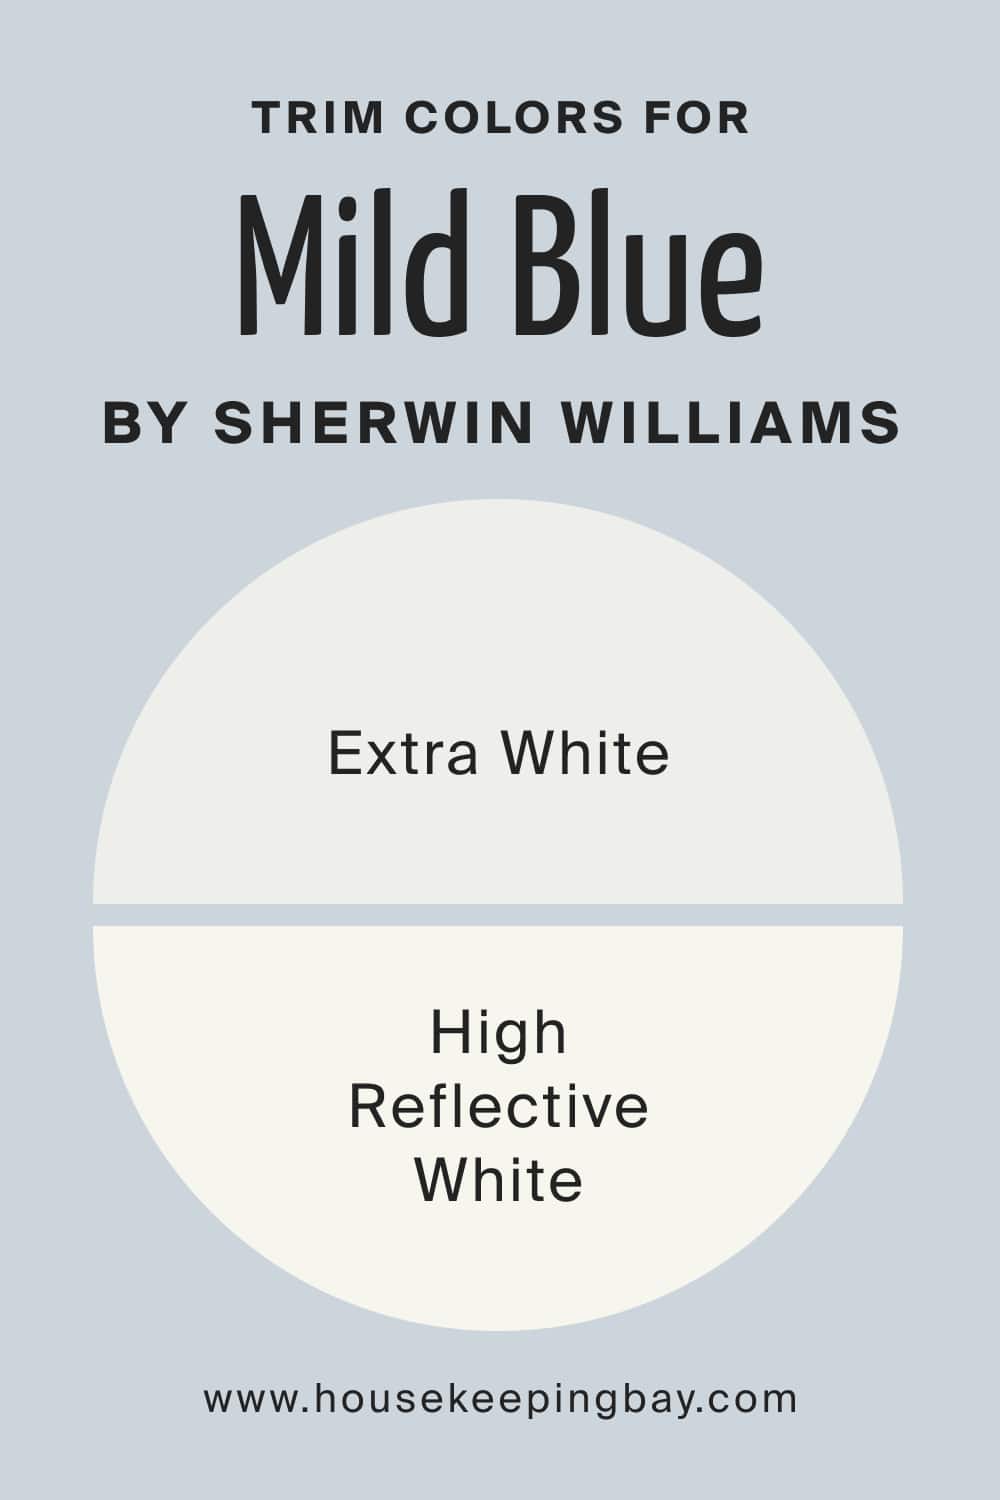 Trim Colors for Mild Blue SW 6533 by Sherwin Williams